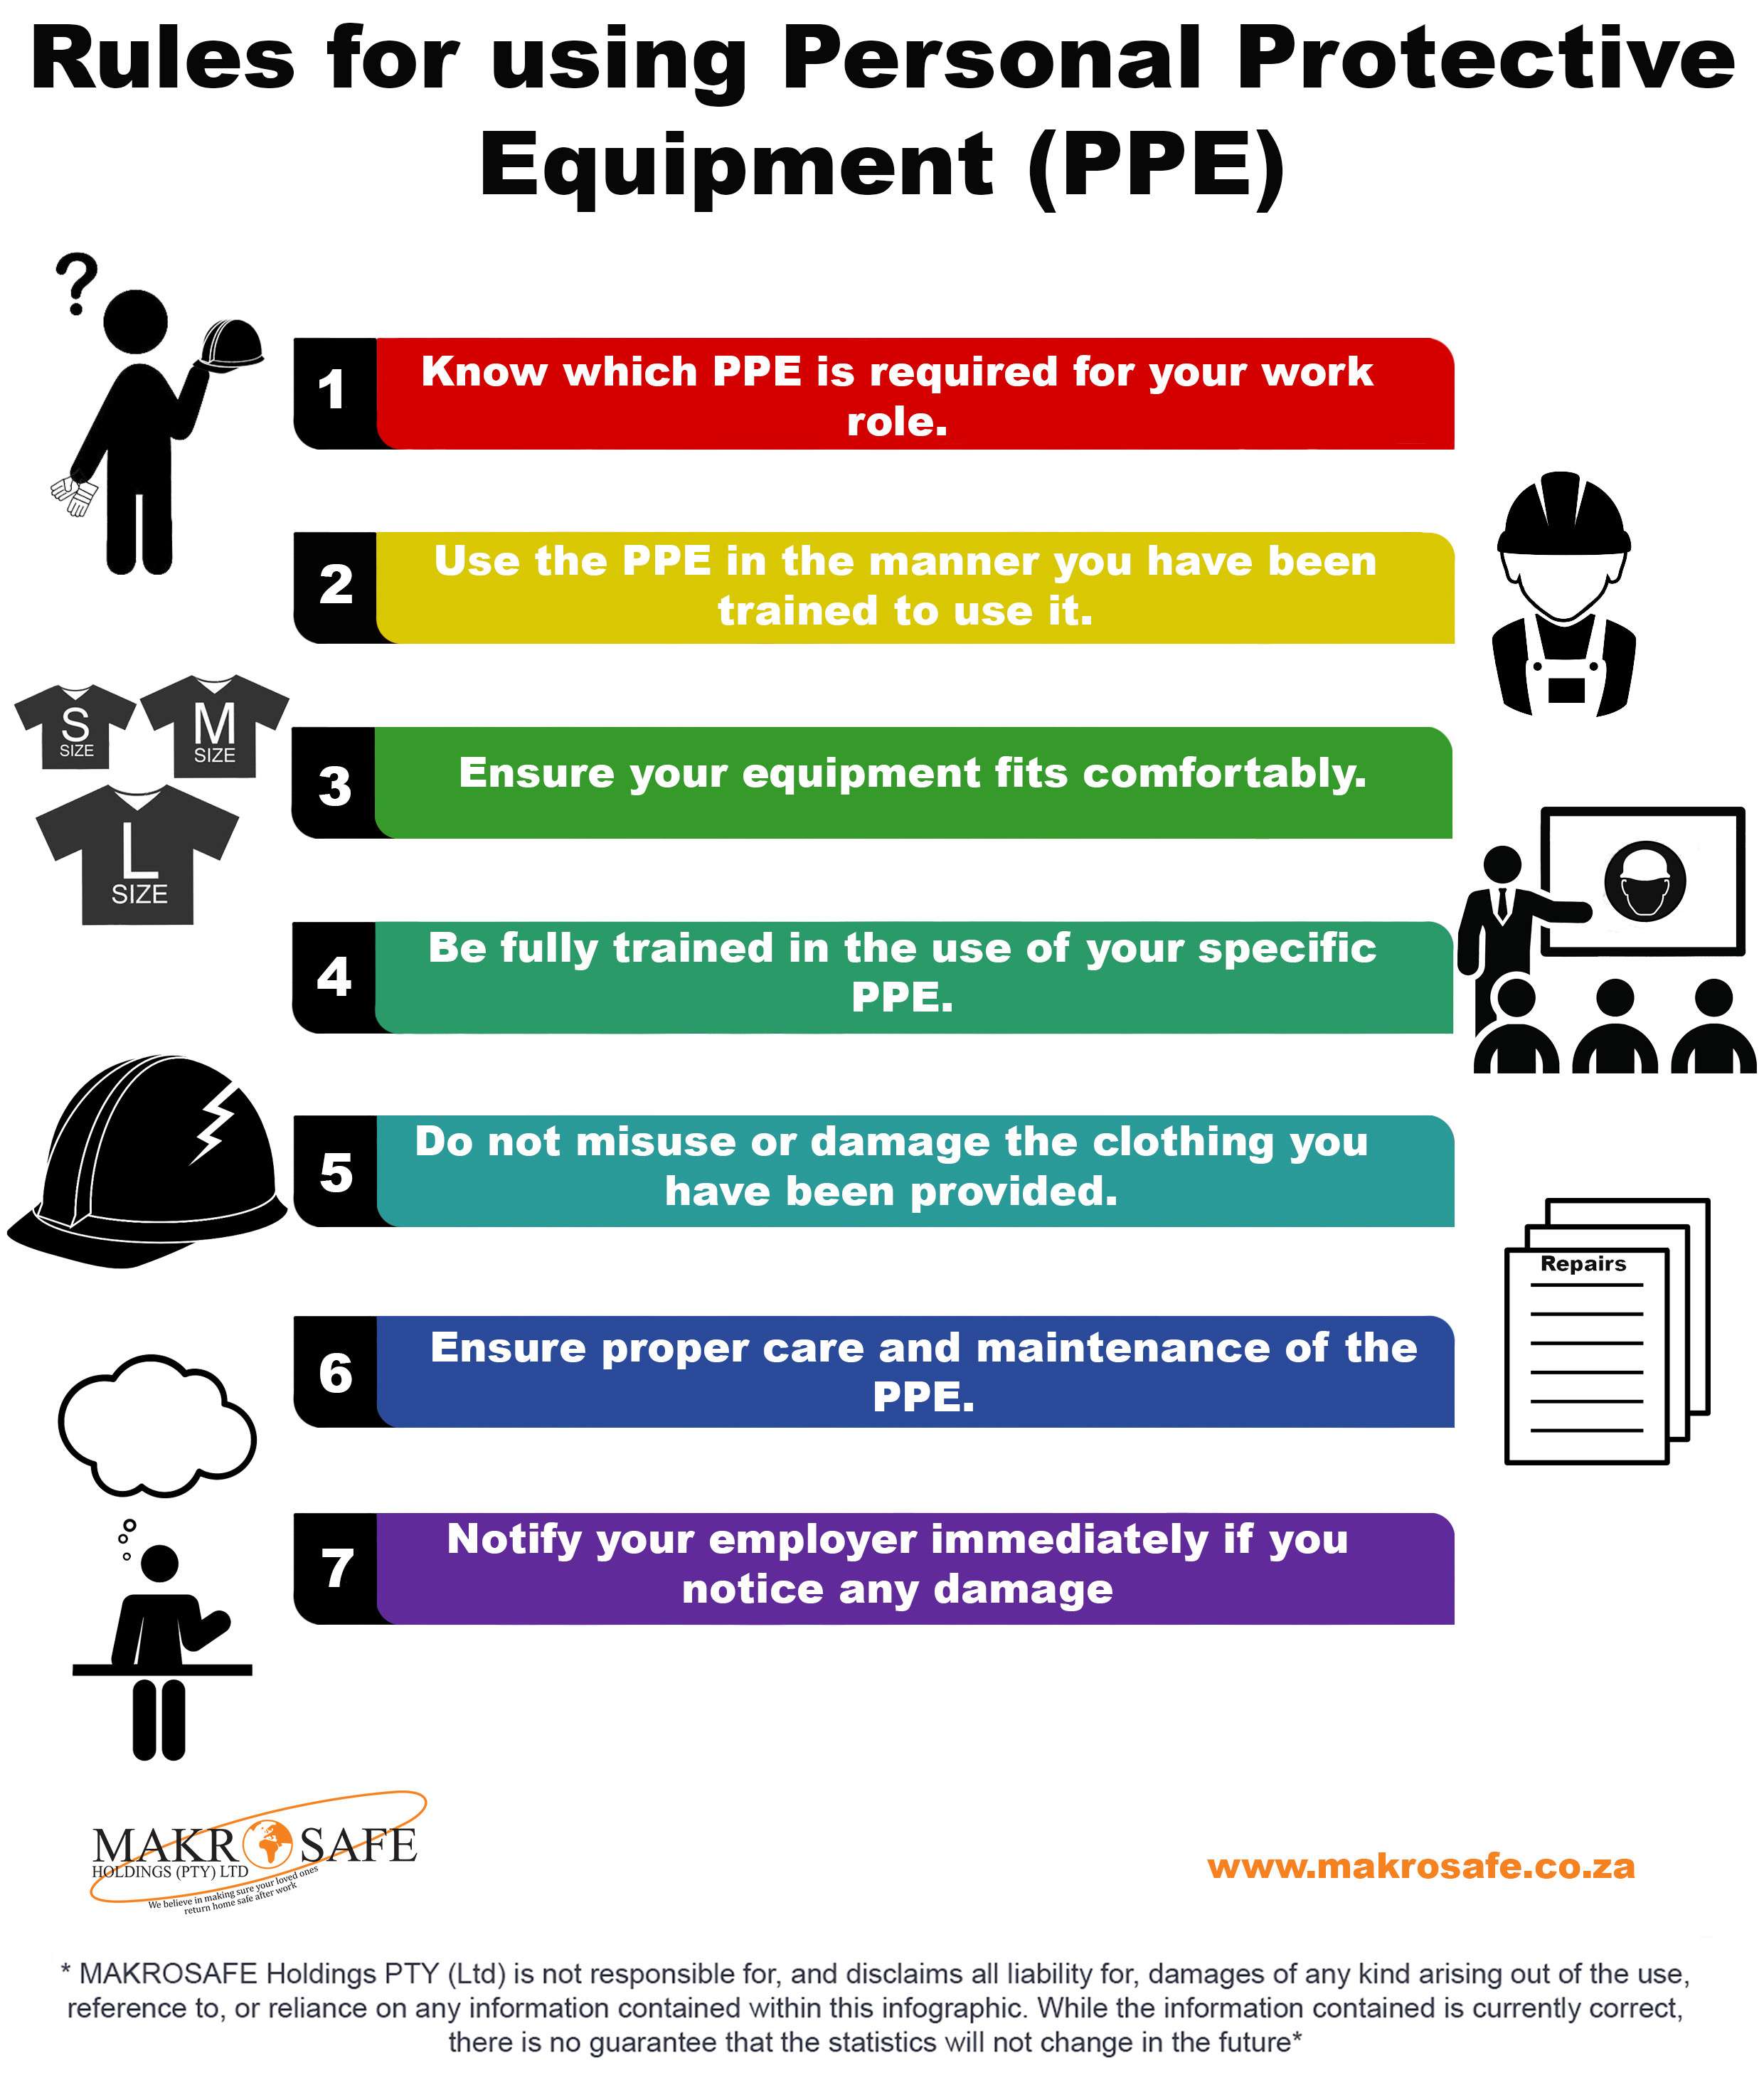 Rules for using PPE 